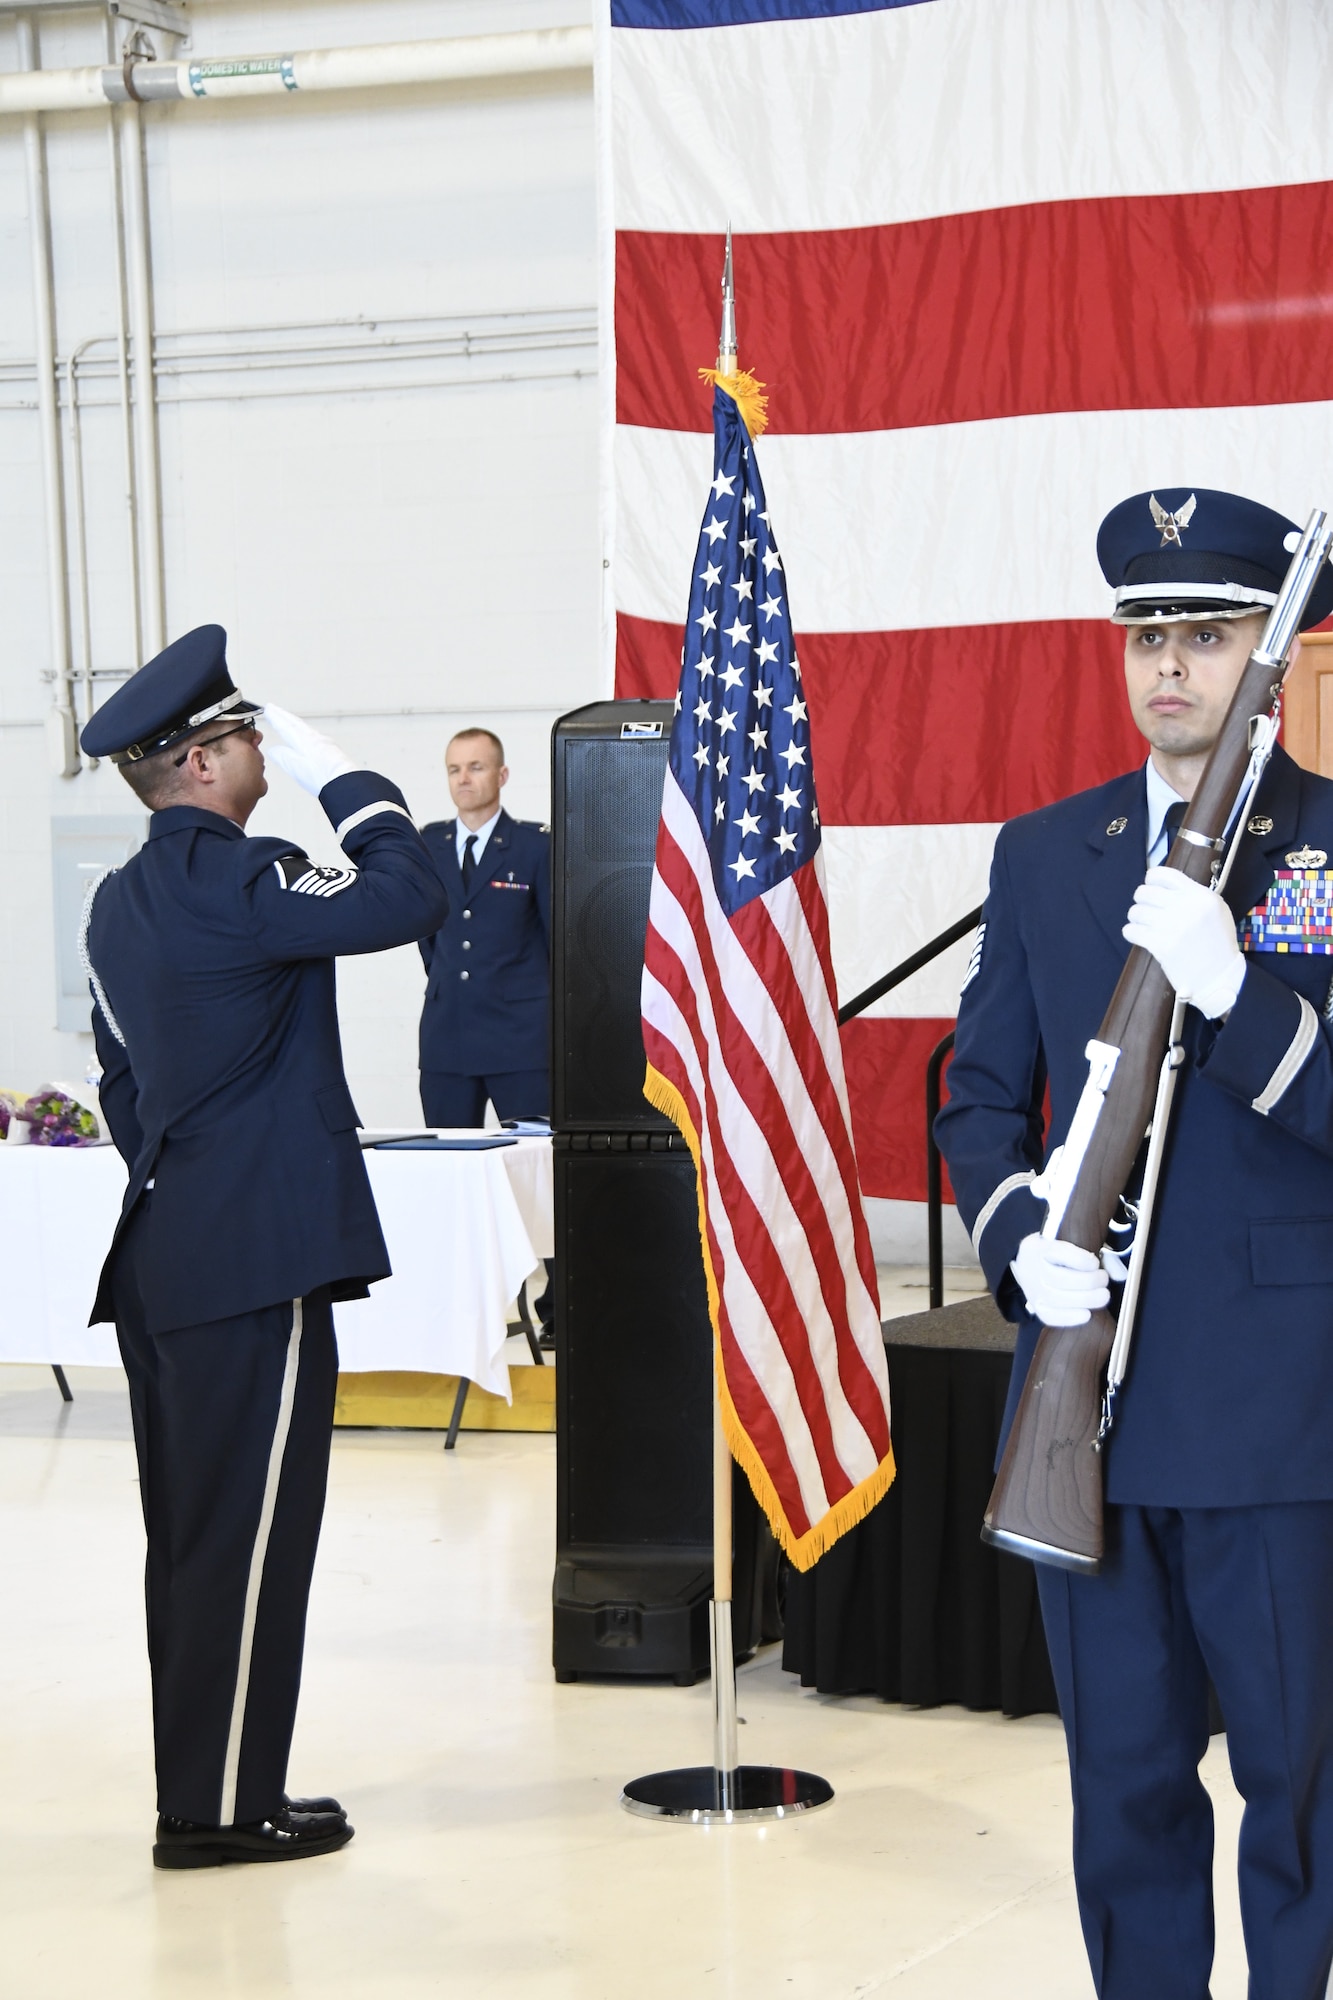 One Honor Guard member salutes a small flag while another stand at attention with honor guard riffle.